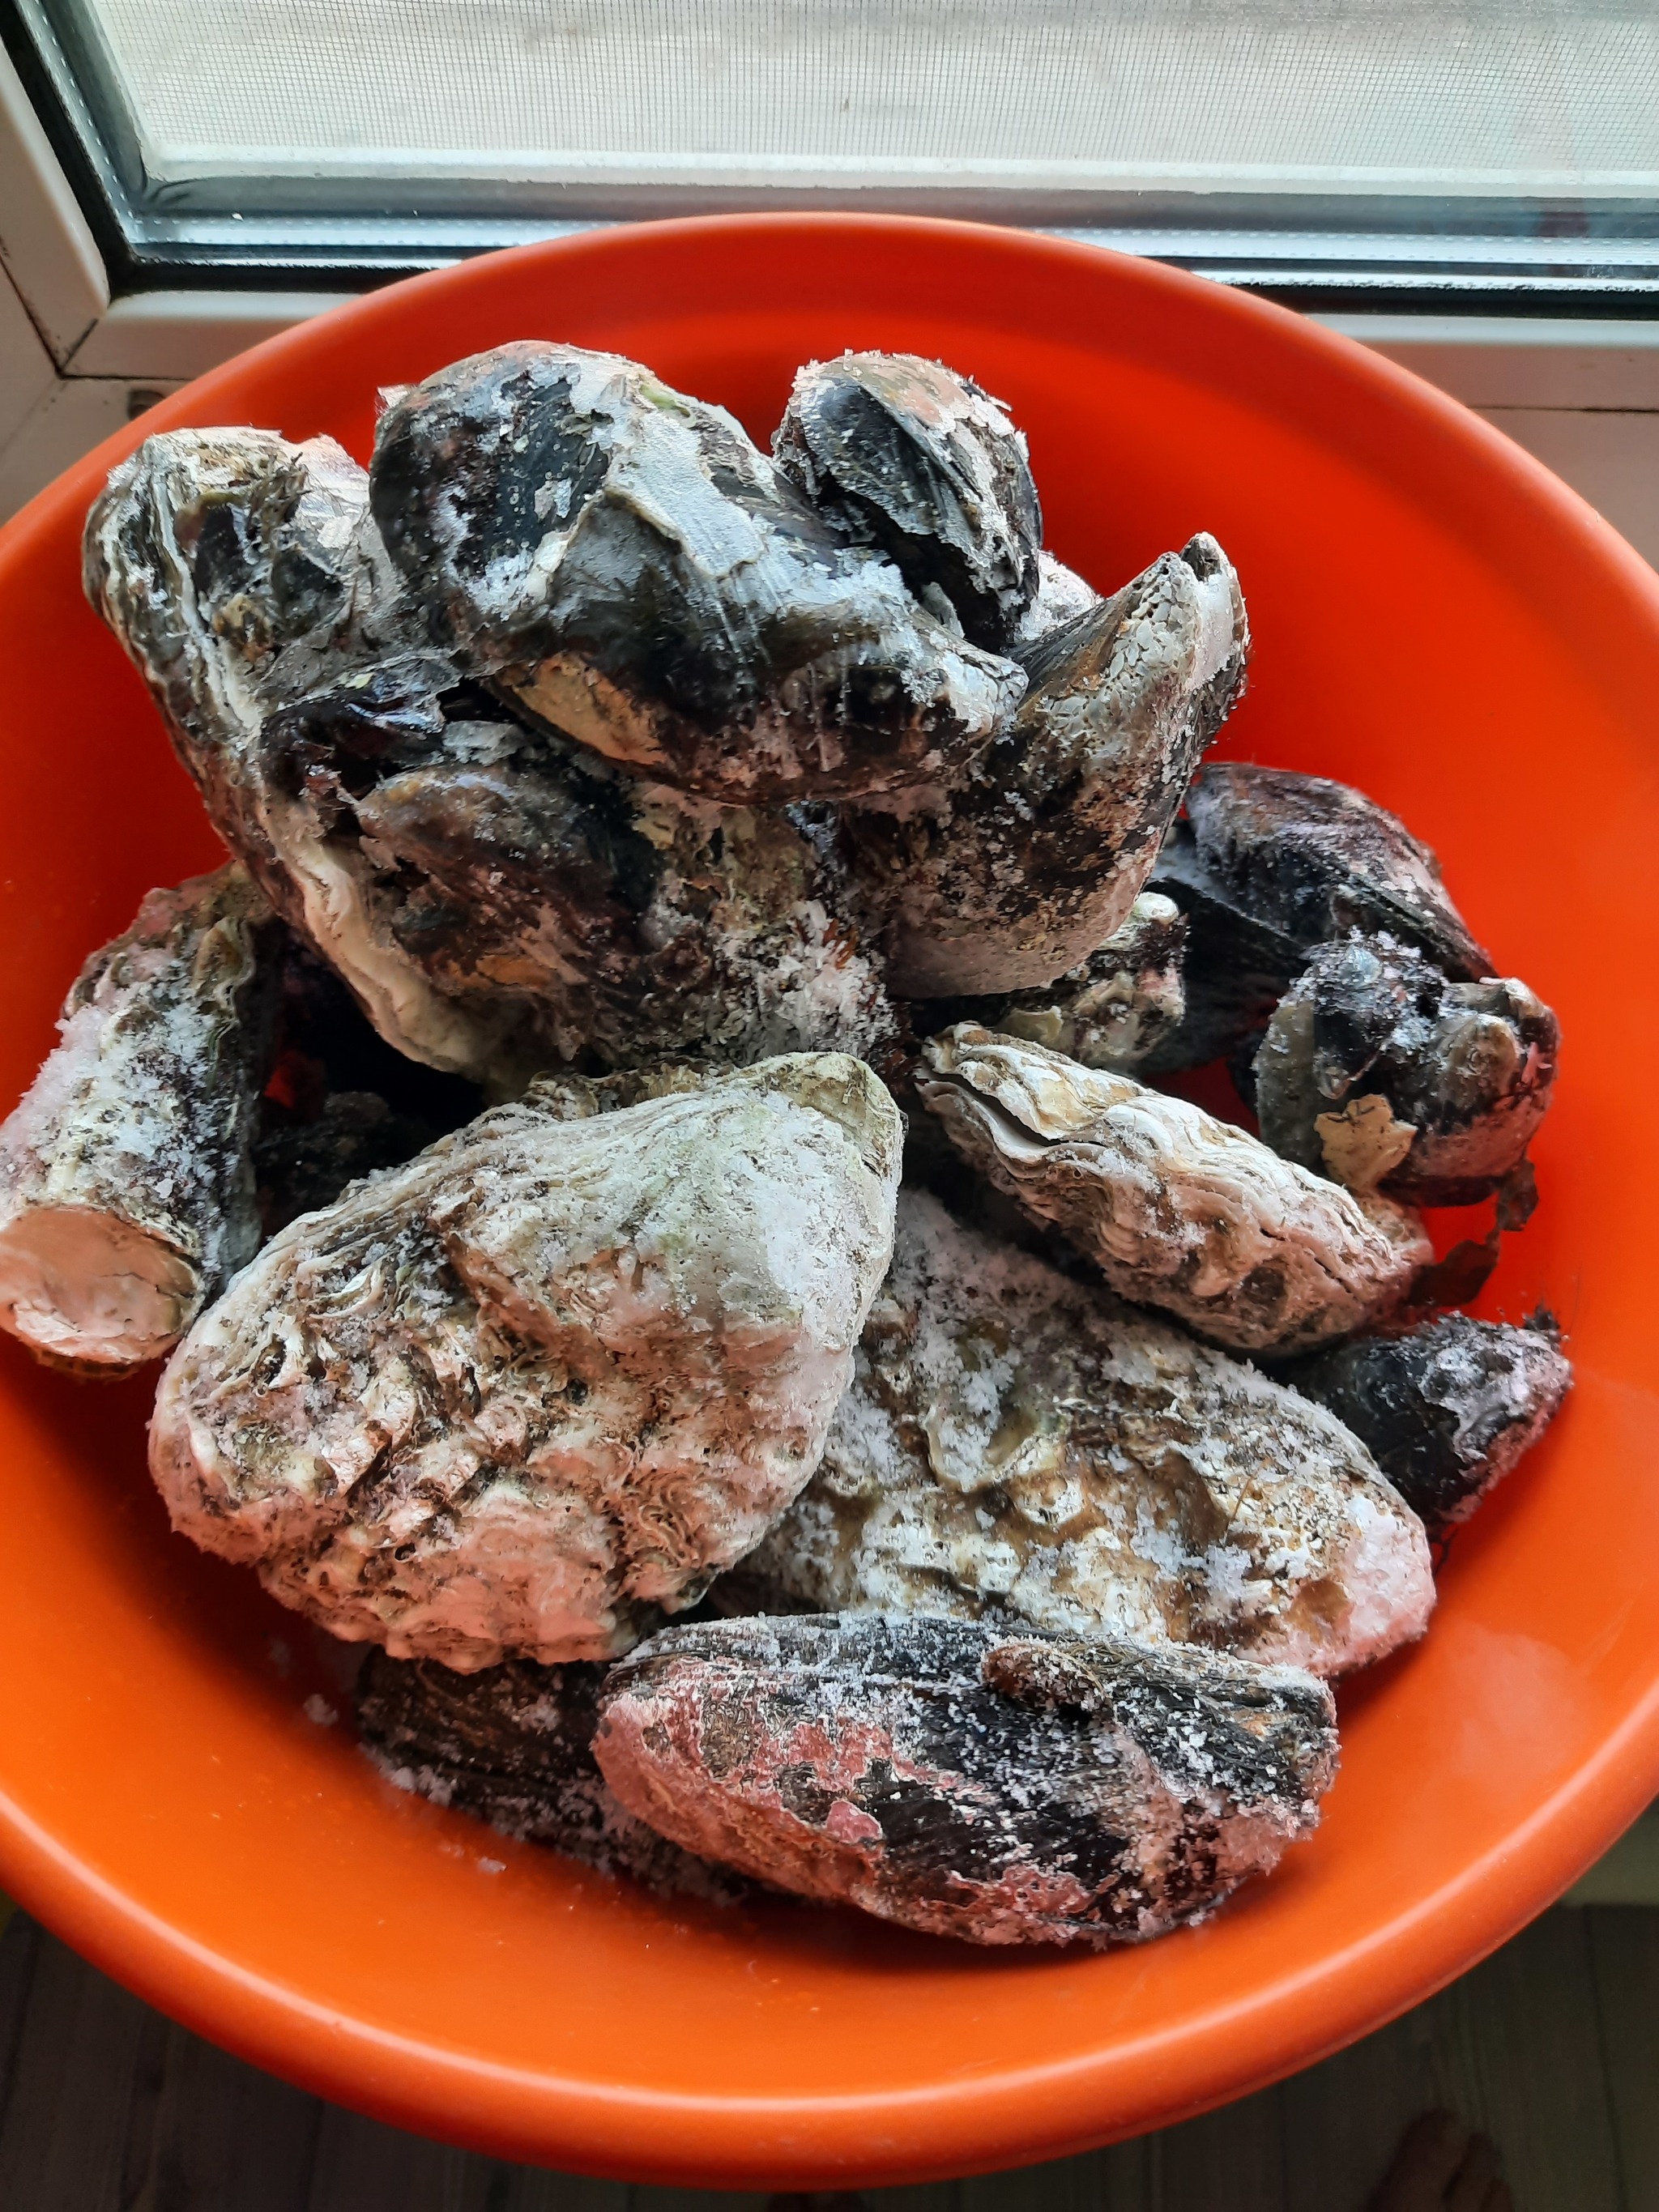 Kind with healthy - Oysters, Mussels, Walk, Gifts of the sea, Sea, My